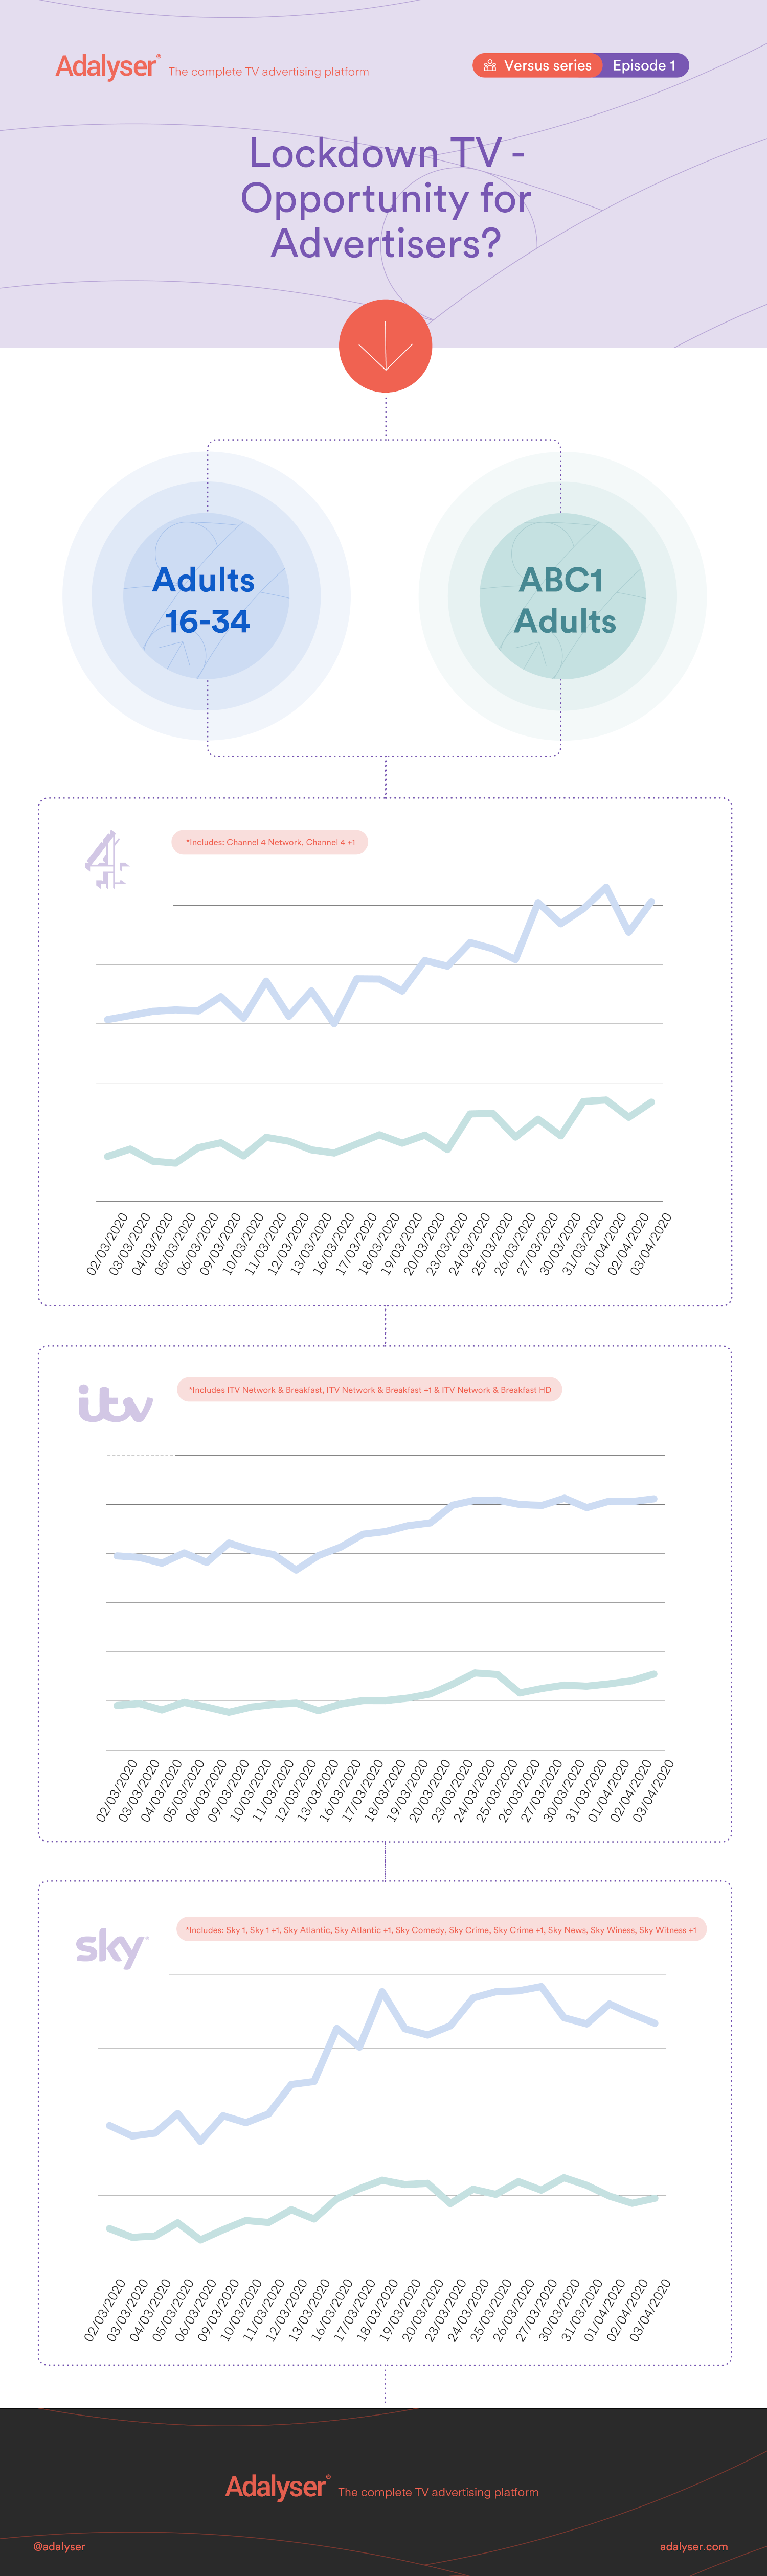 infographic analysing the impact of lockdown on tv advertising